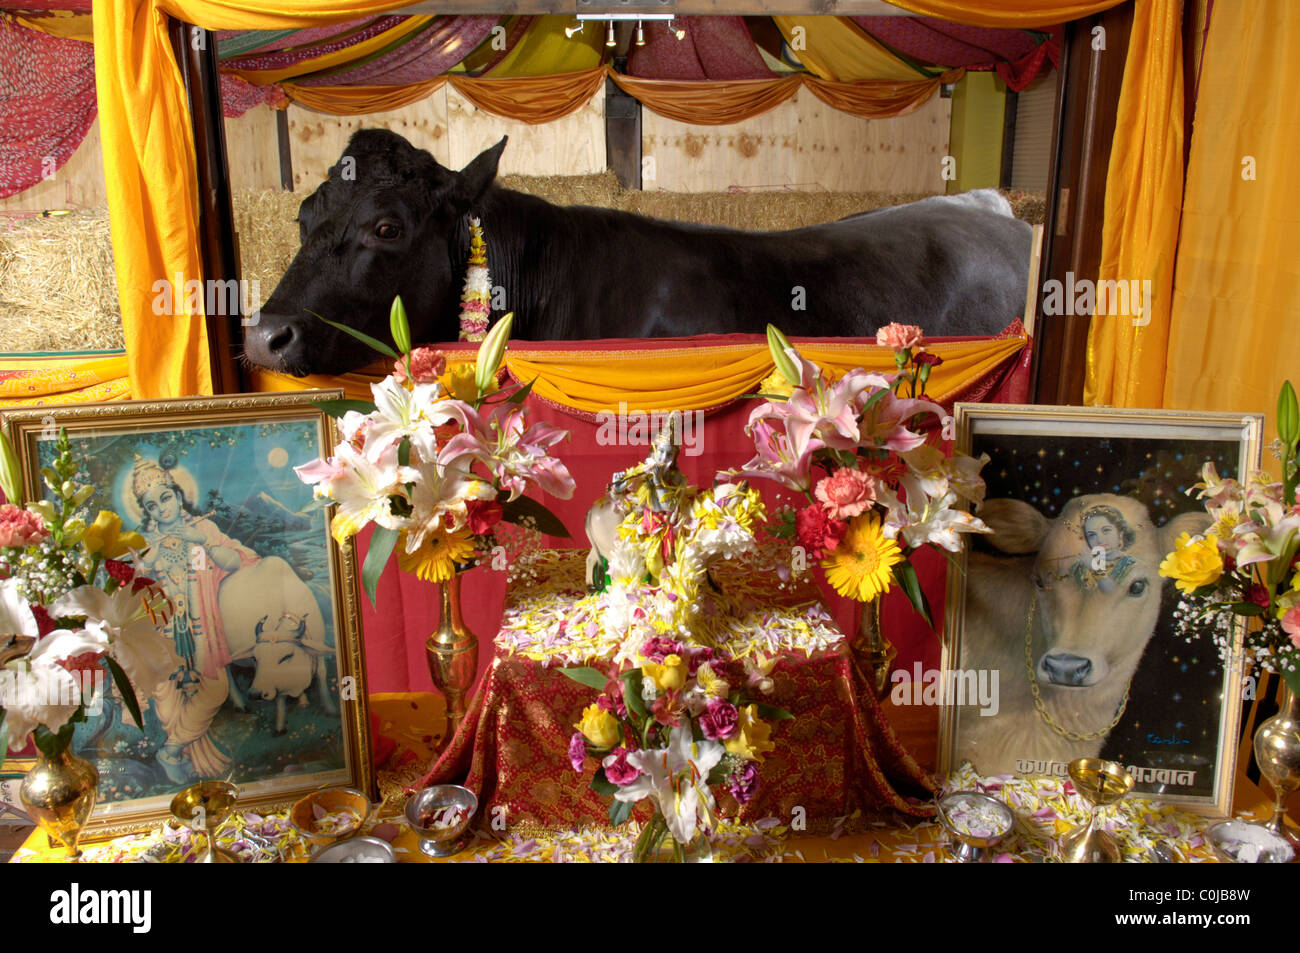 Shambo a Friesian bull lived in the Hindu Skanda Vales Temple before being slaughtered after testing positive for Bovine TB Stock Photo